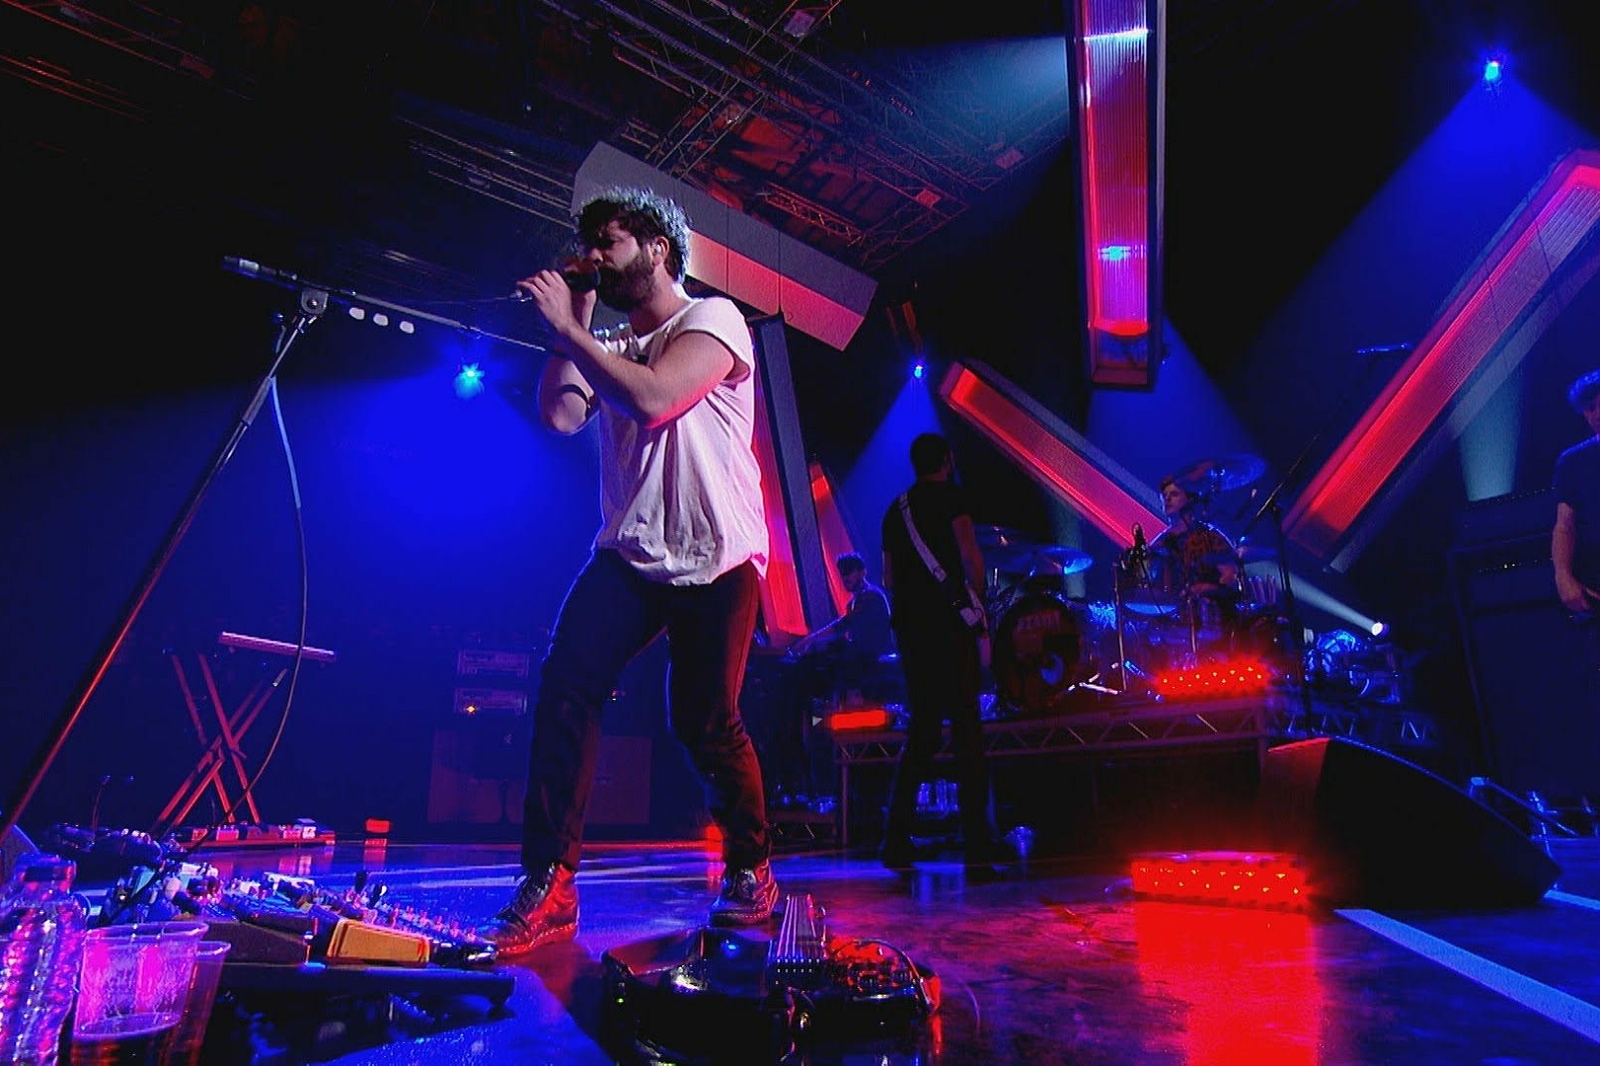 Watch Foals, Disclosure and Kwabs open the new series of Later... With Jools Holland